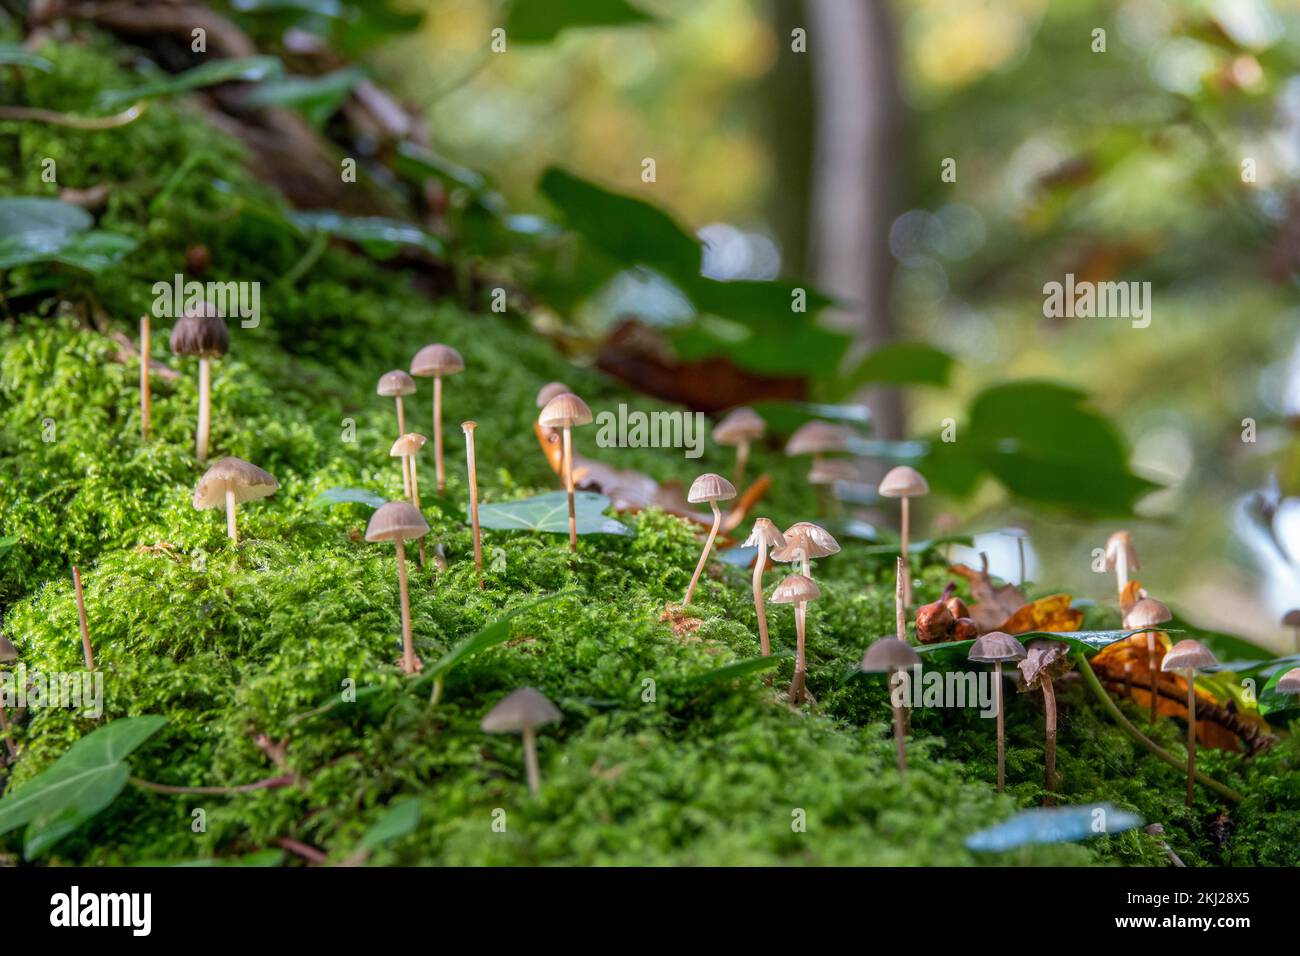 pretty small petticoat mottlegill mushrooms growing up through bright green moss with a blurred background Stock Photo